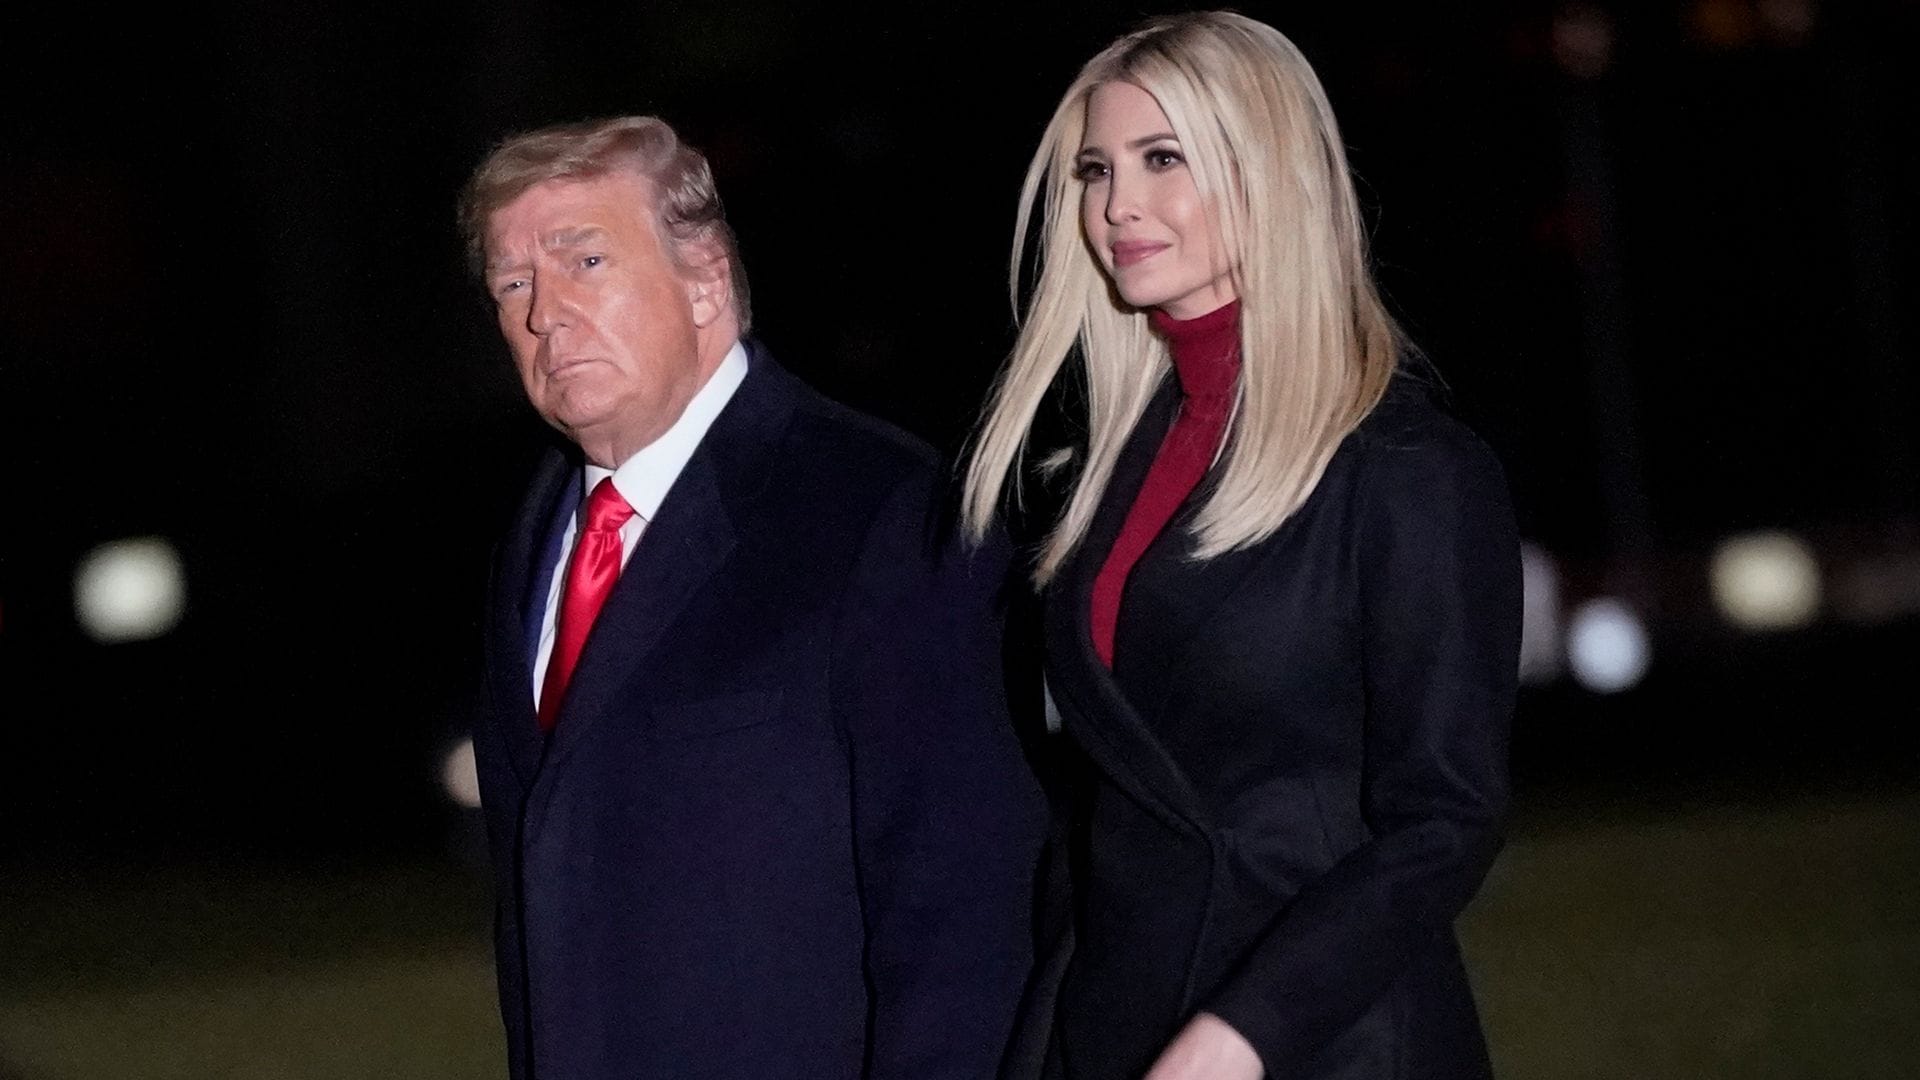 Ivanka Trump met with dad Donald Trump after the attempted assassination on him: Details